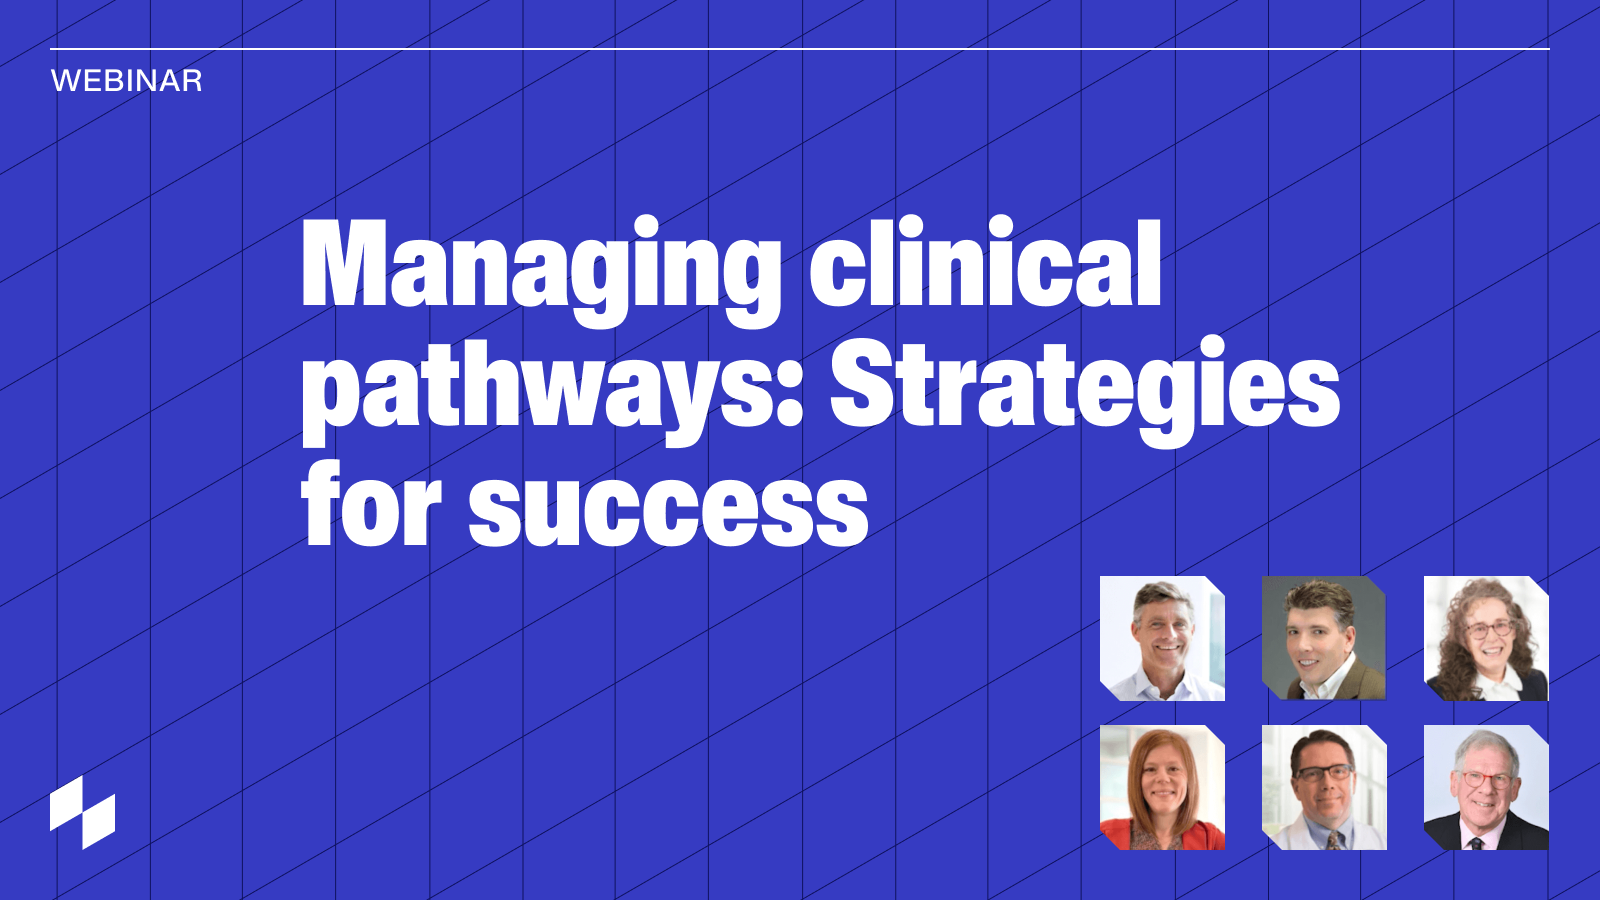 Managing clinical pathways: Strategies for success